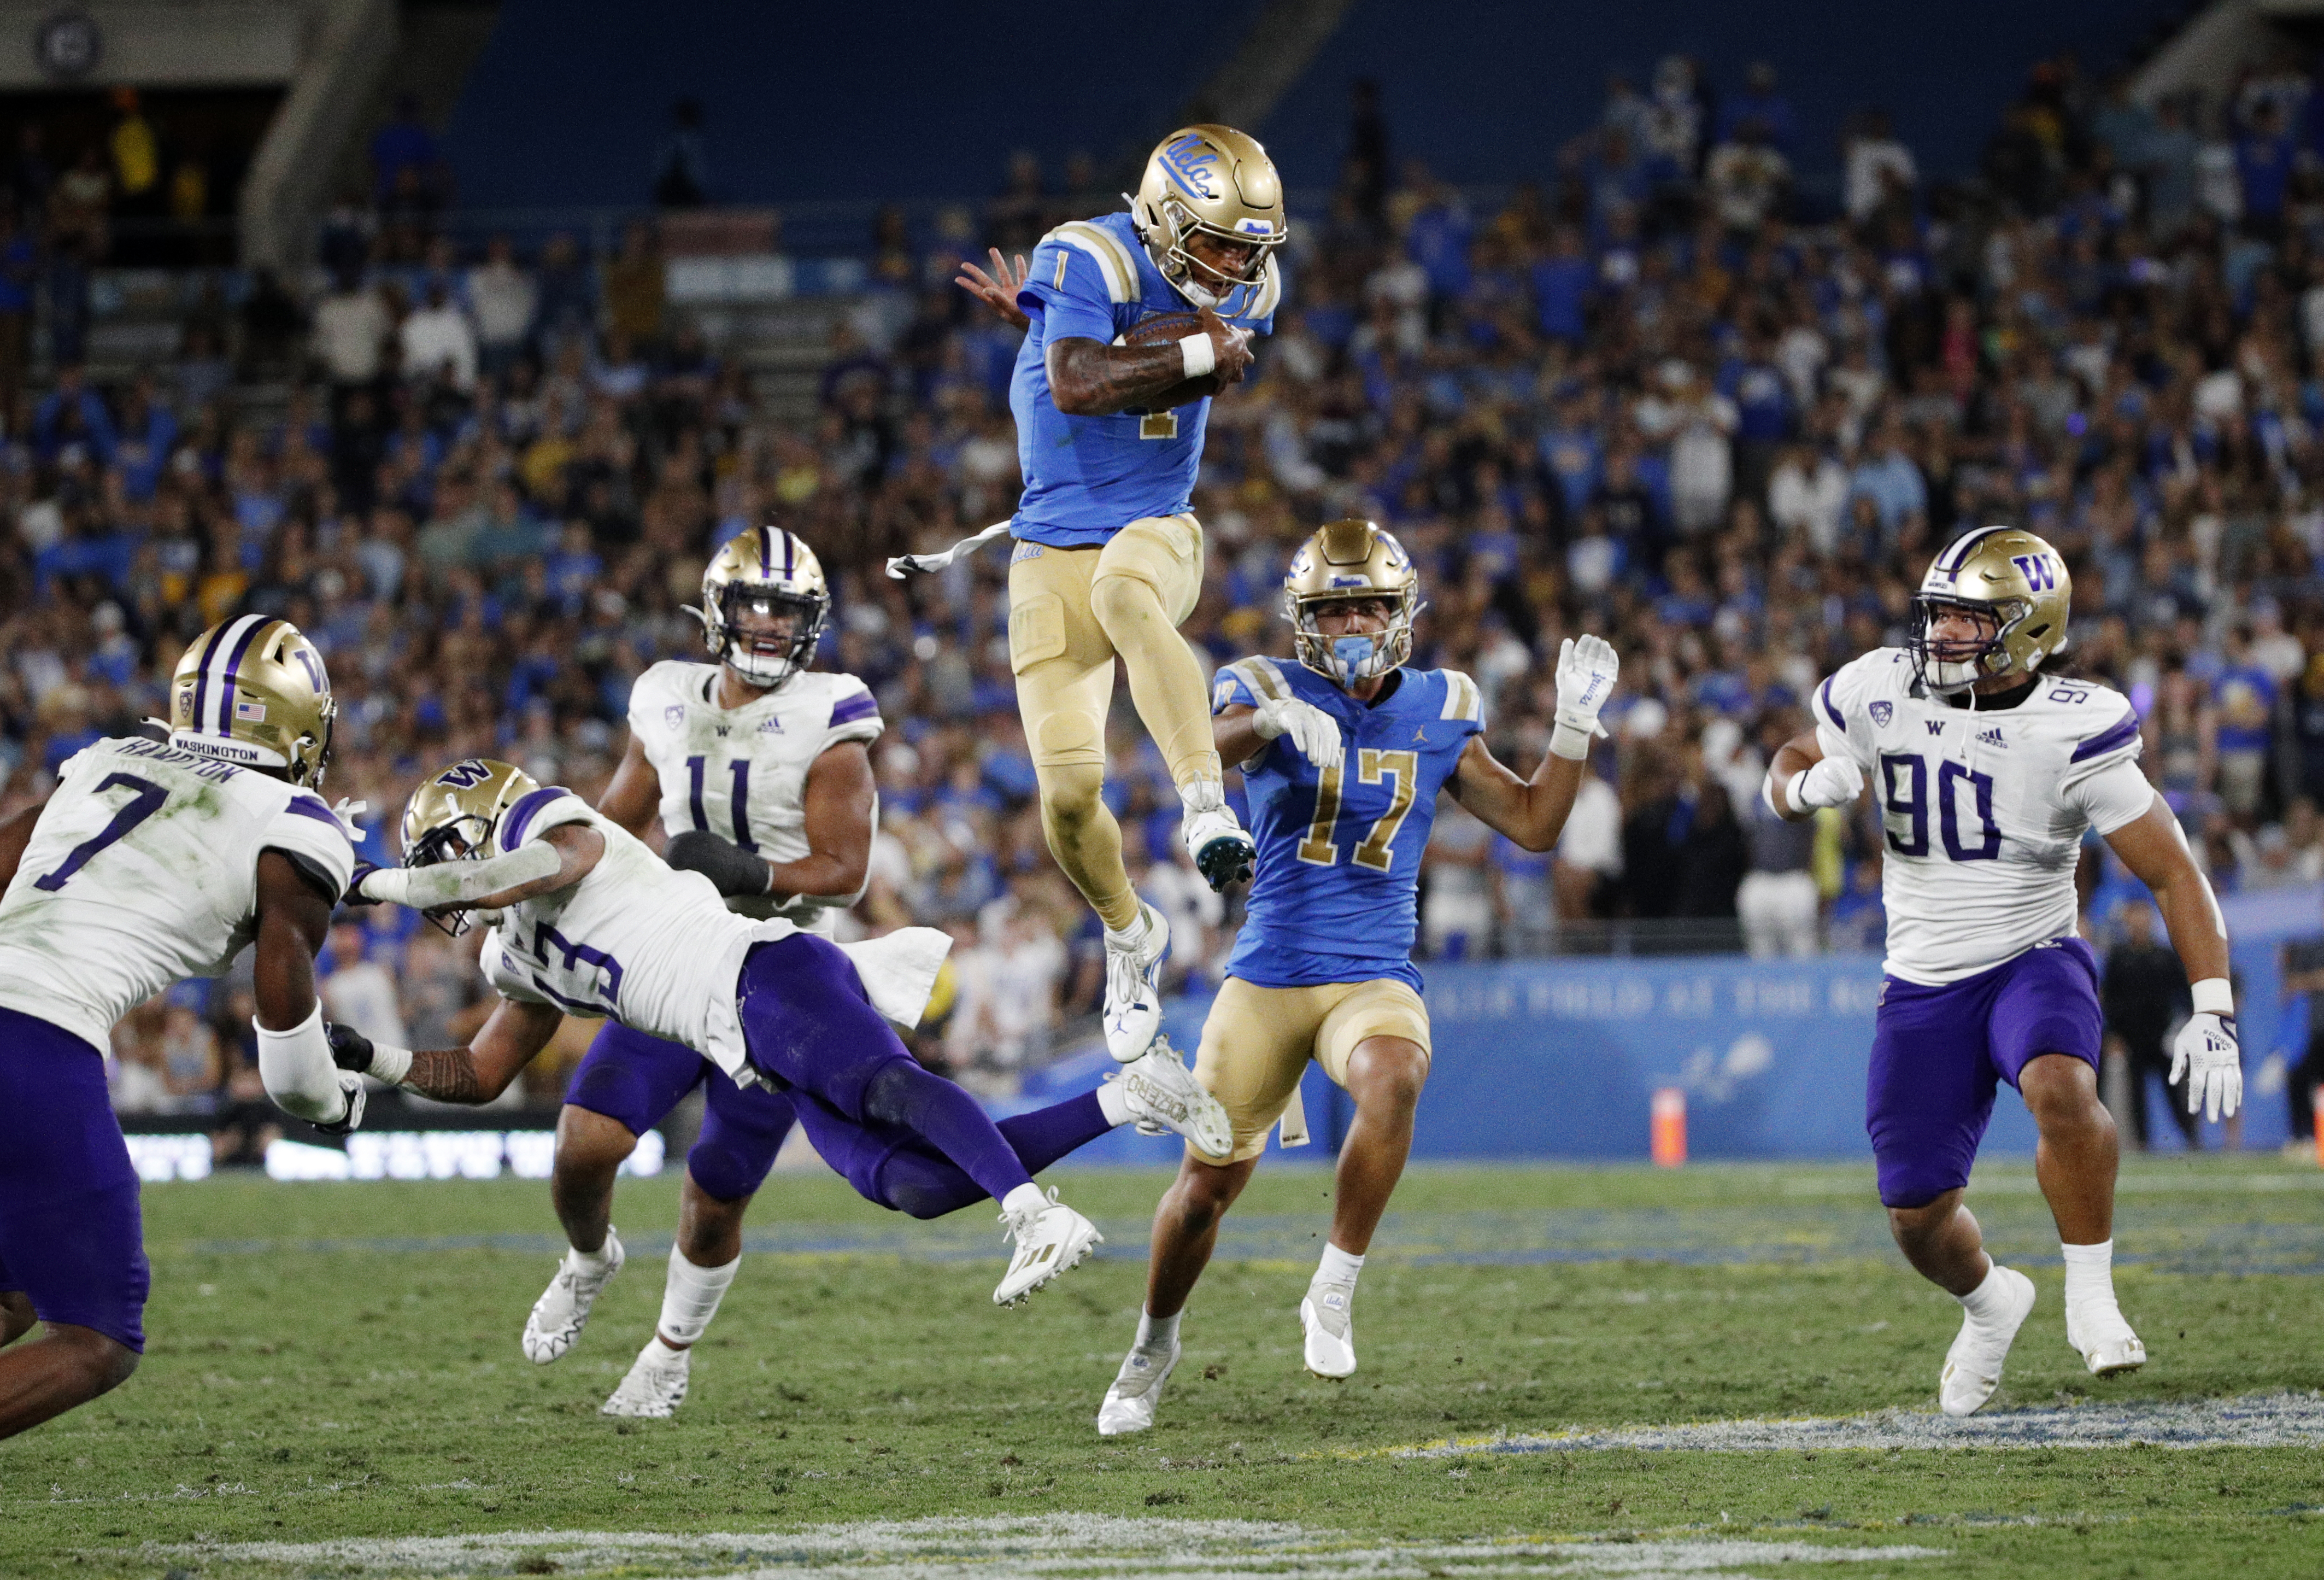 Column: After UCLA upset No. 15 Washington, it’s time to stop ignoring the Bruins